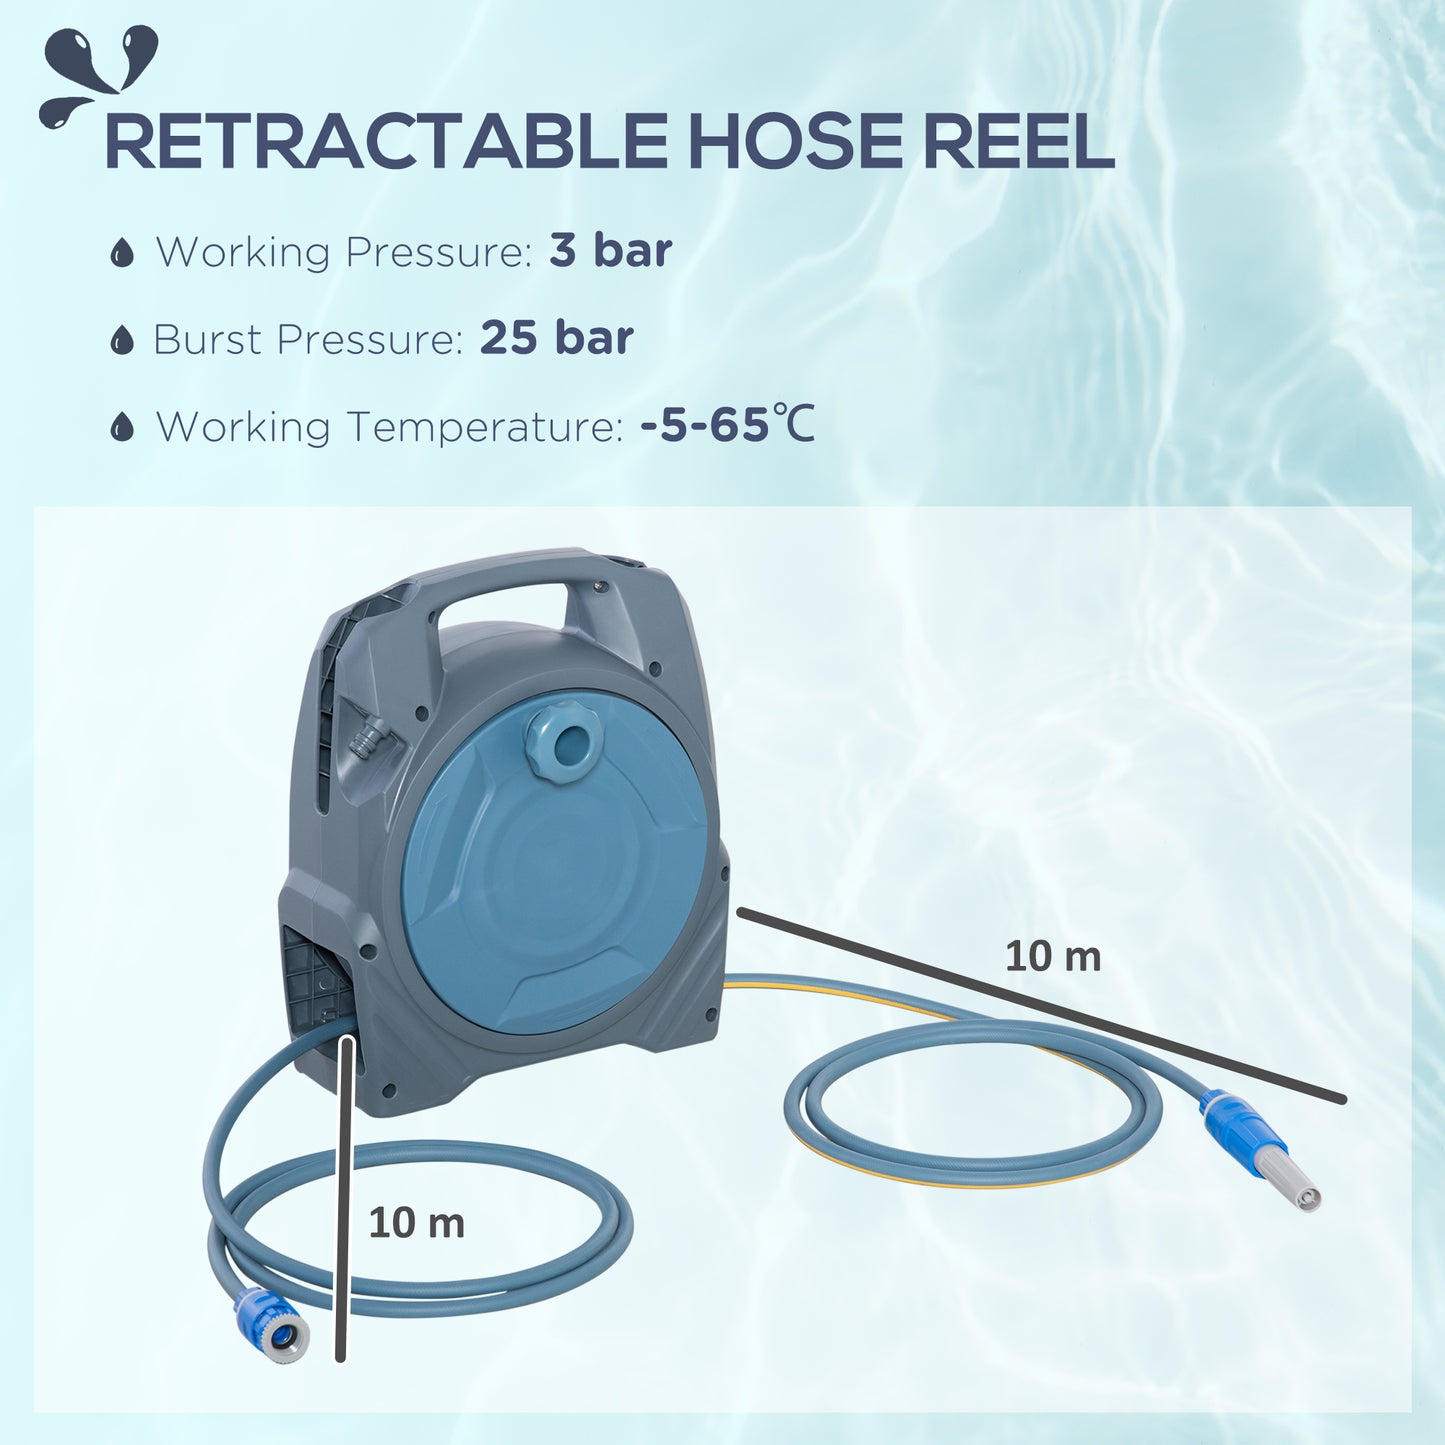 Outsunny Compact Hose Reel, Retractable Dual 10m Hose System, Manual Rewind, Lightweight Design for Garden Watering, Green.